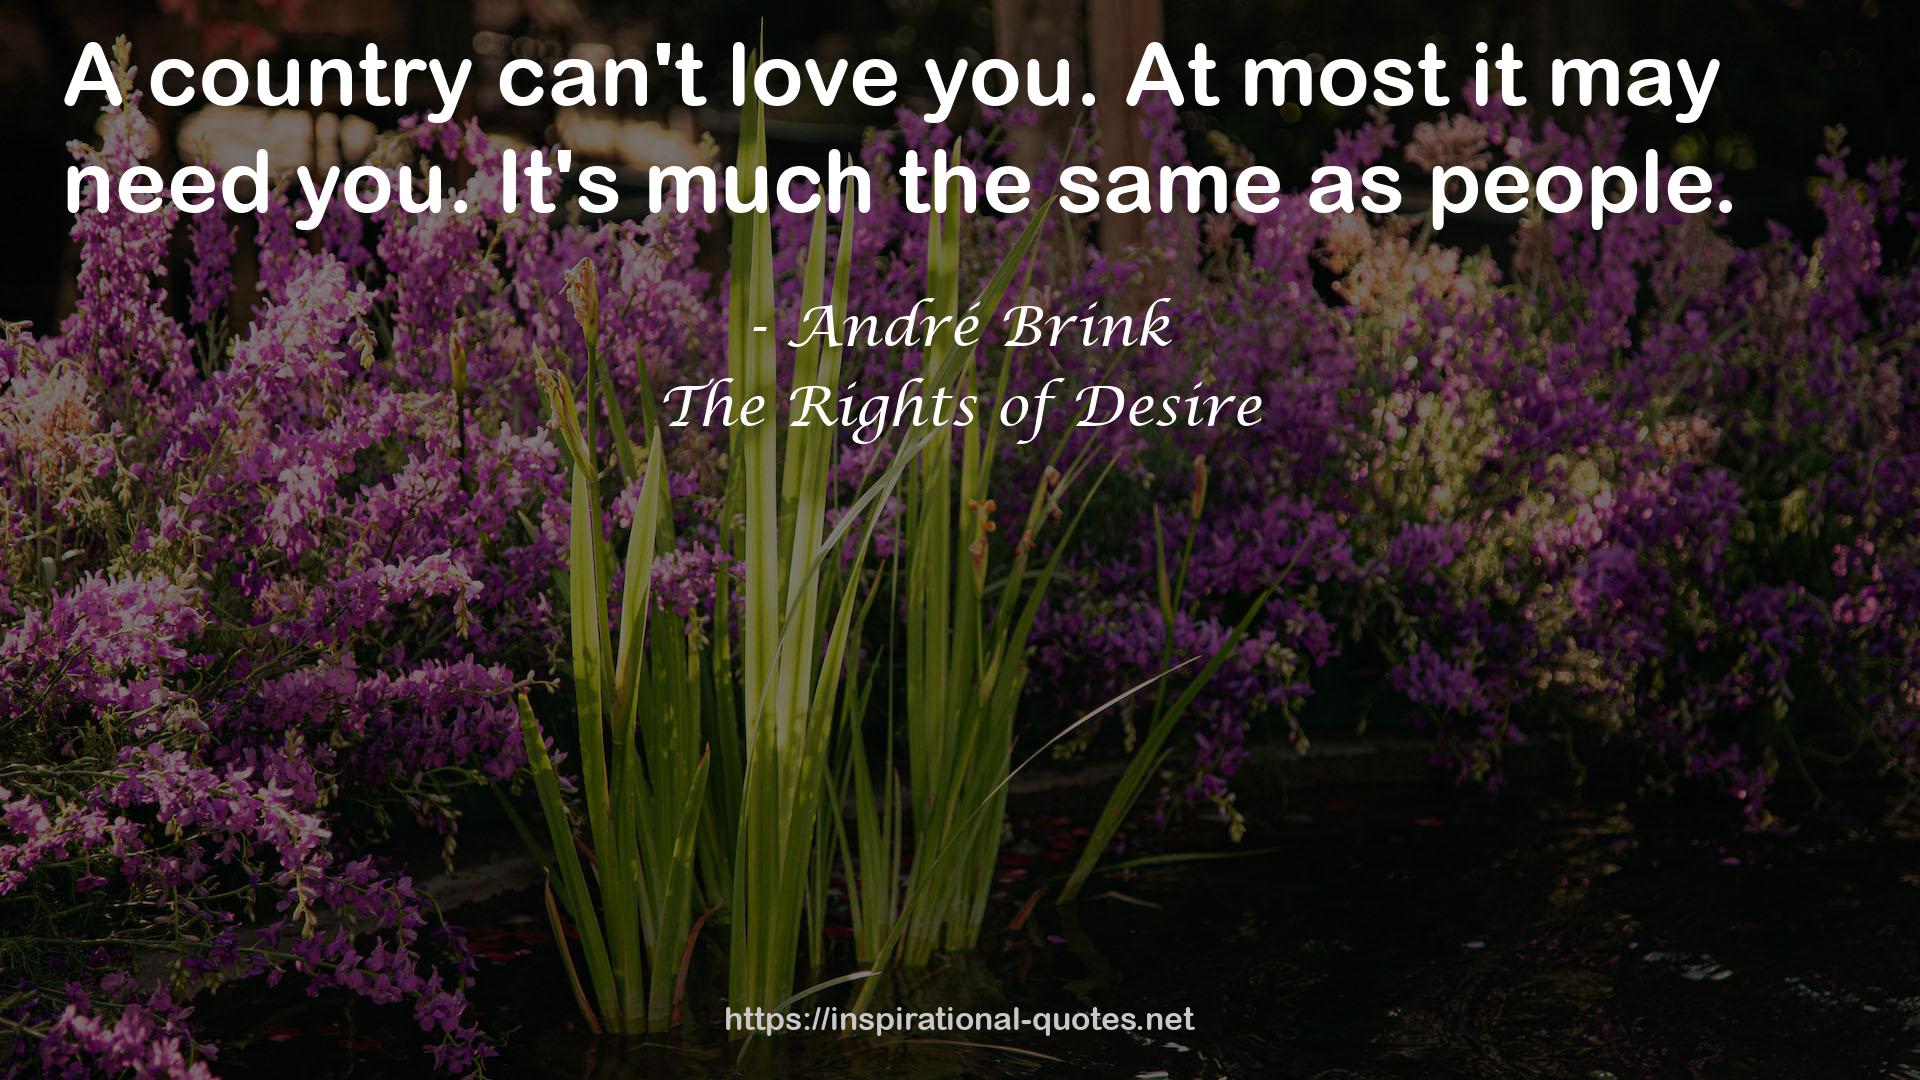 The Rights of Desire QUOTES